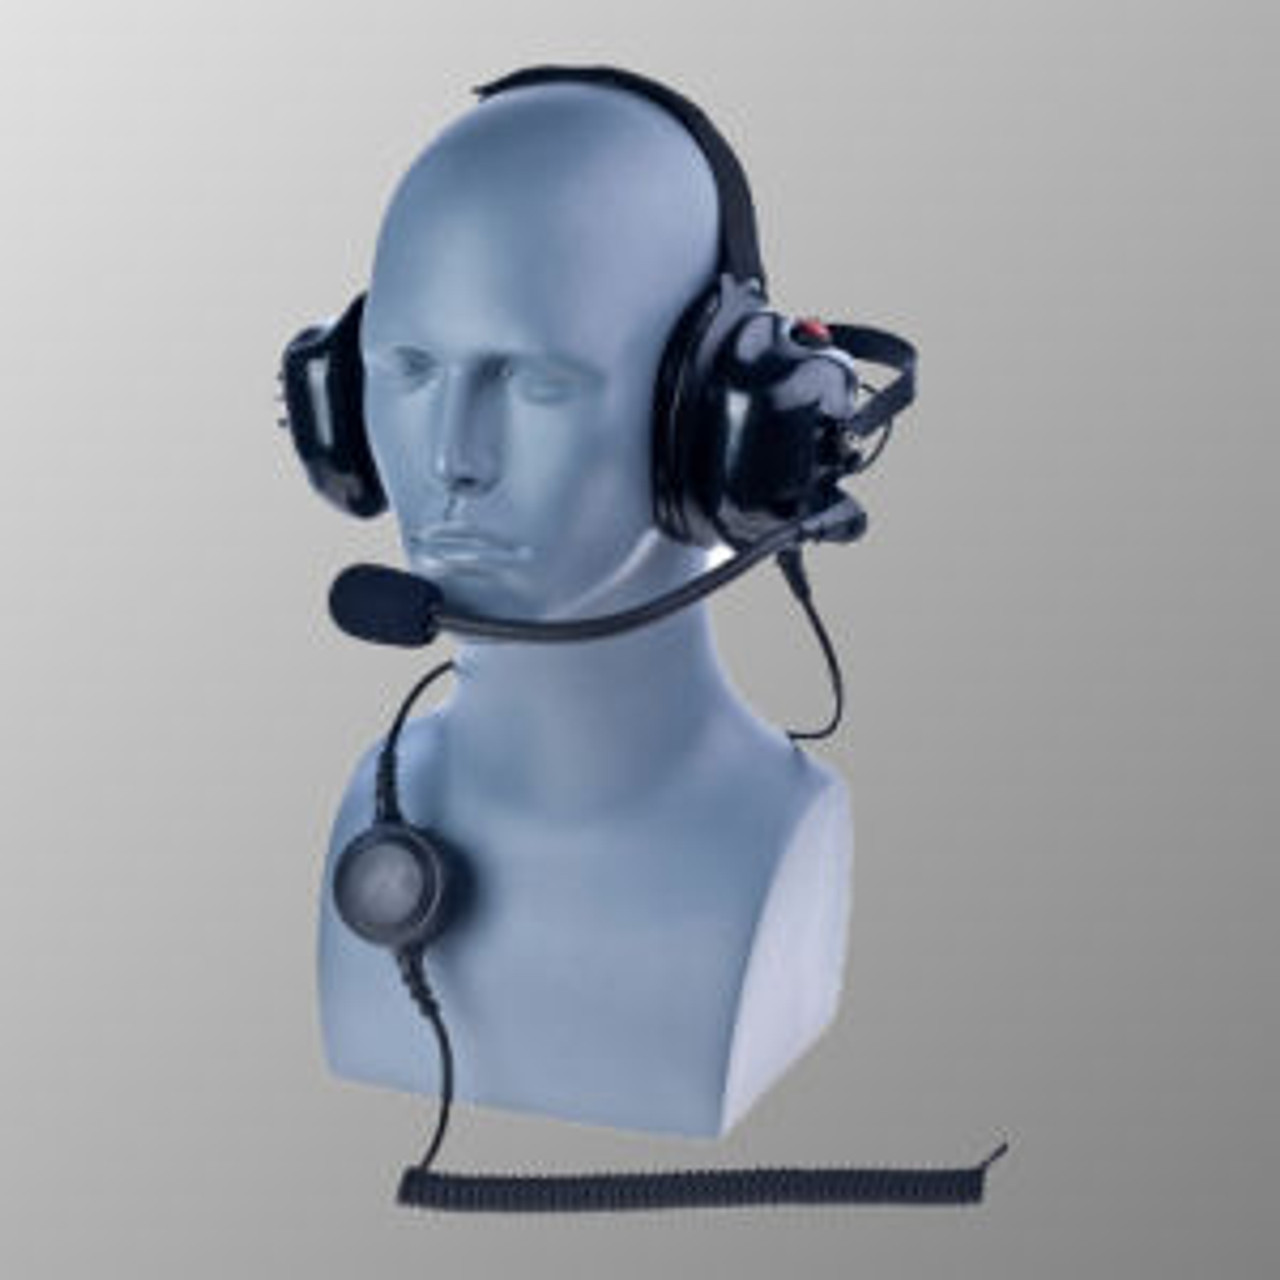 Motorola APX900 Noise Canceling Behind The Head Double Muff Headset